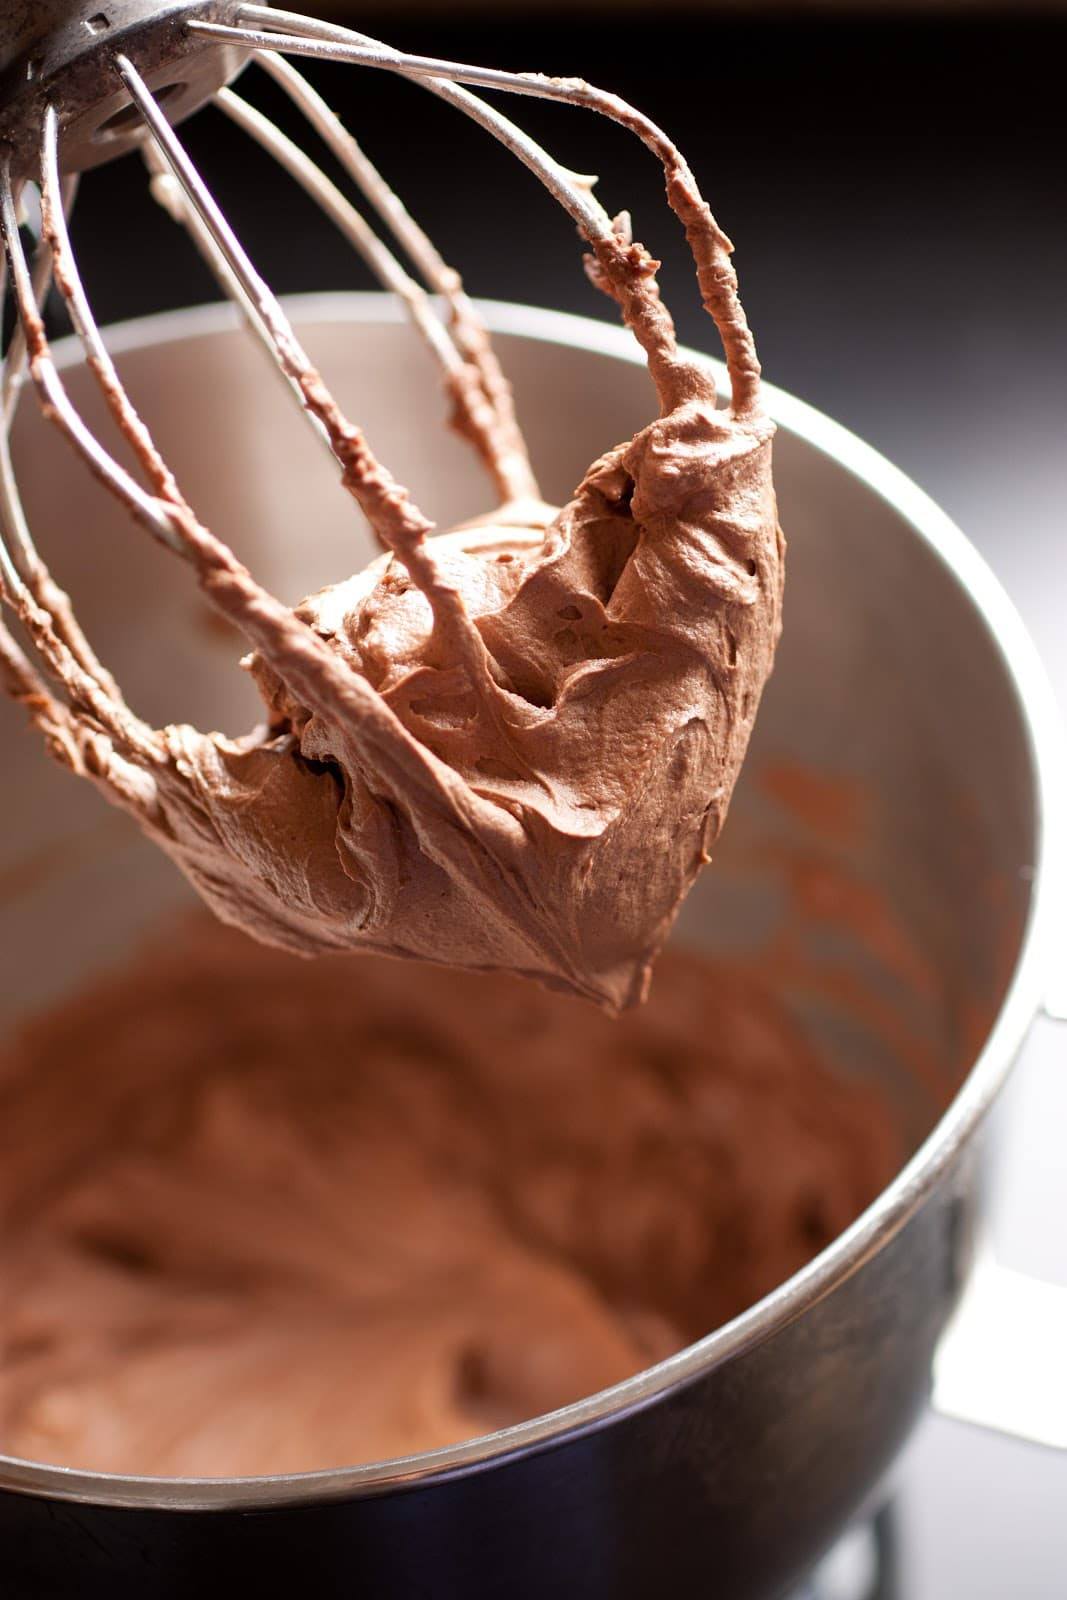 Best Frosting For Chocolate Cake
 The BEST Chocolate Buttercream Frosting Recipe Cooking